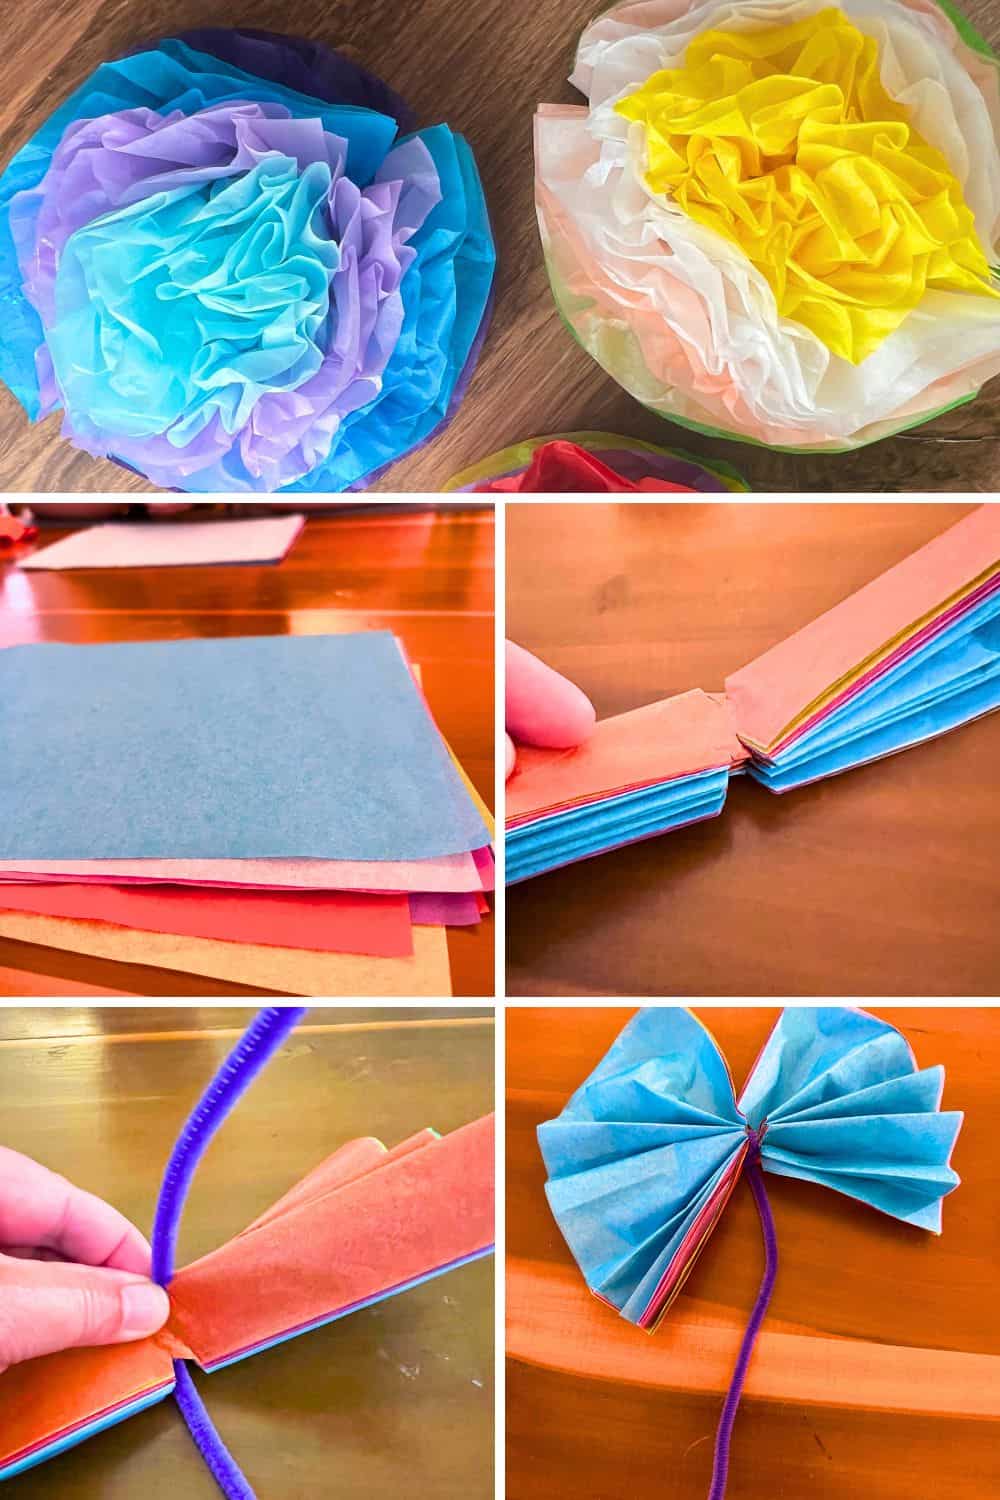 How to Make Tissue Paper Flowers Step By Step (Easy Tissue Paper Pom Poms)